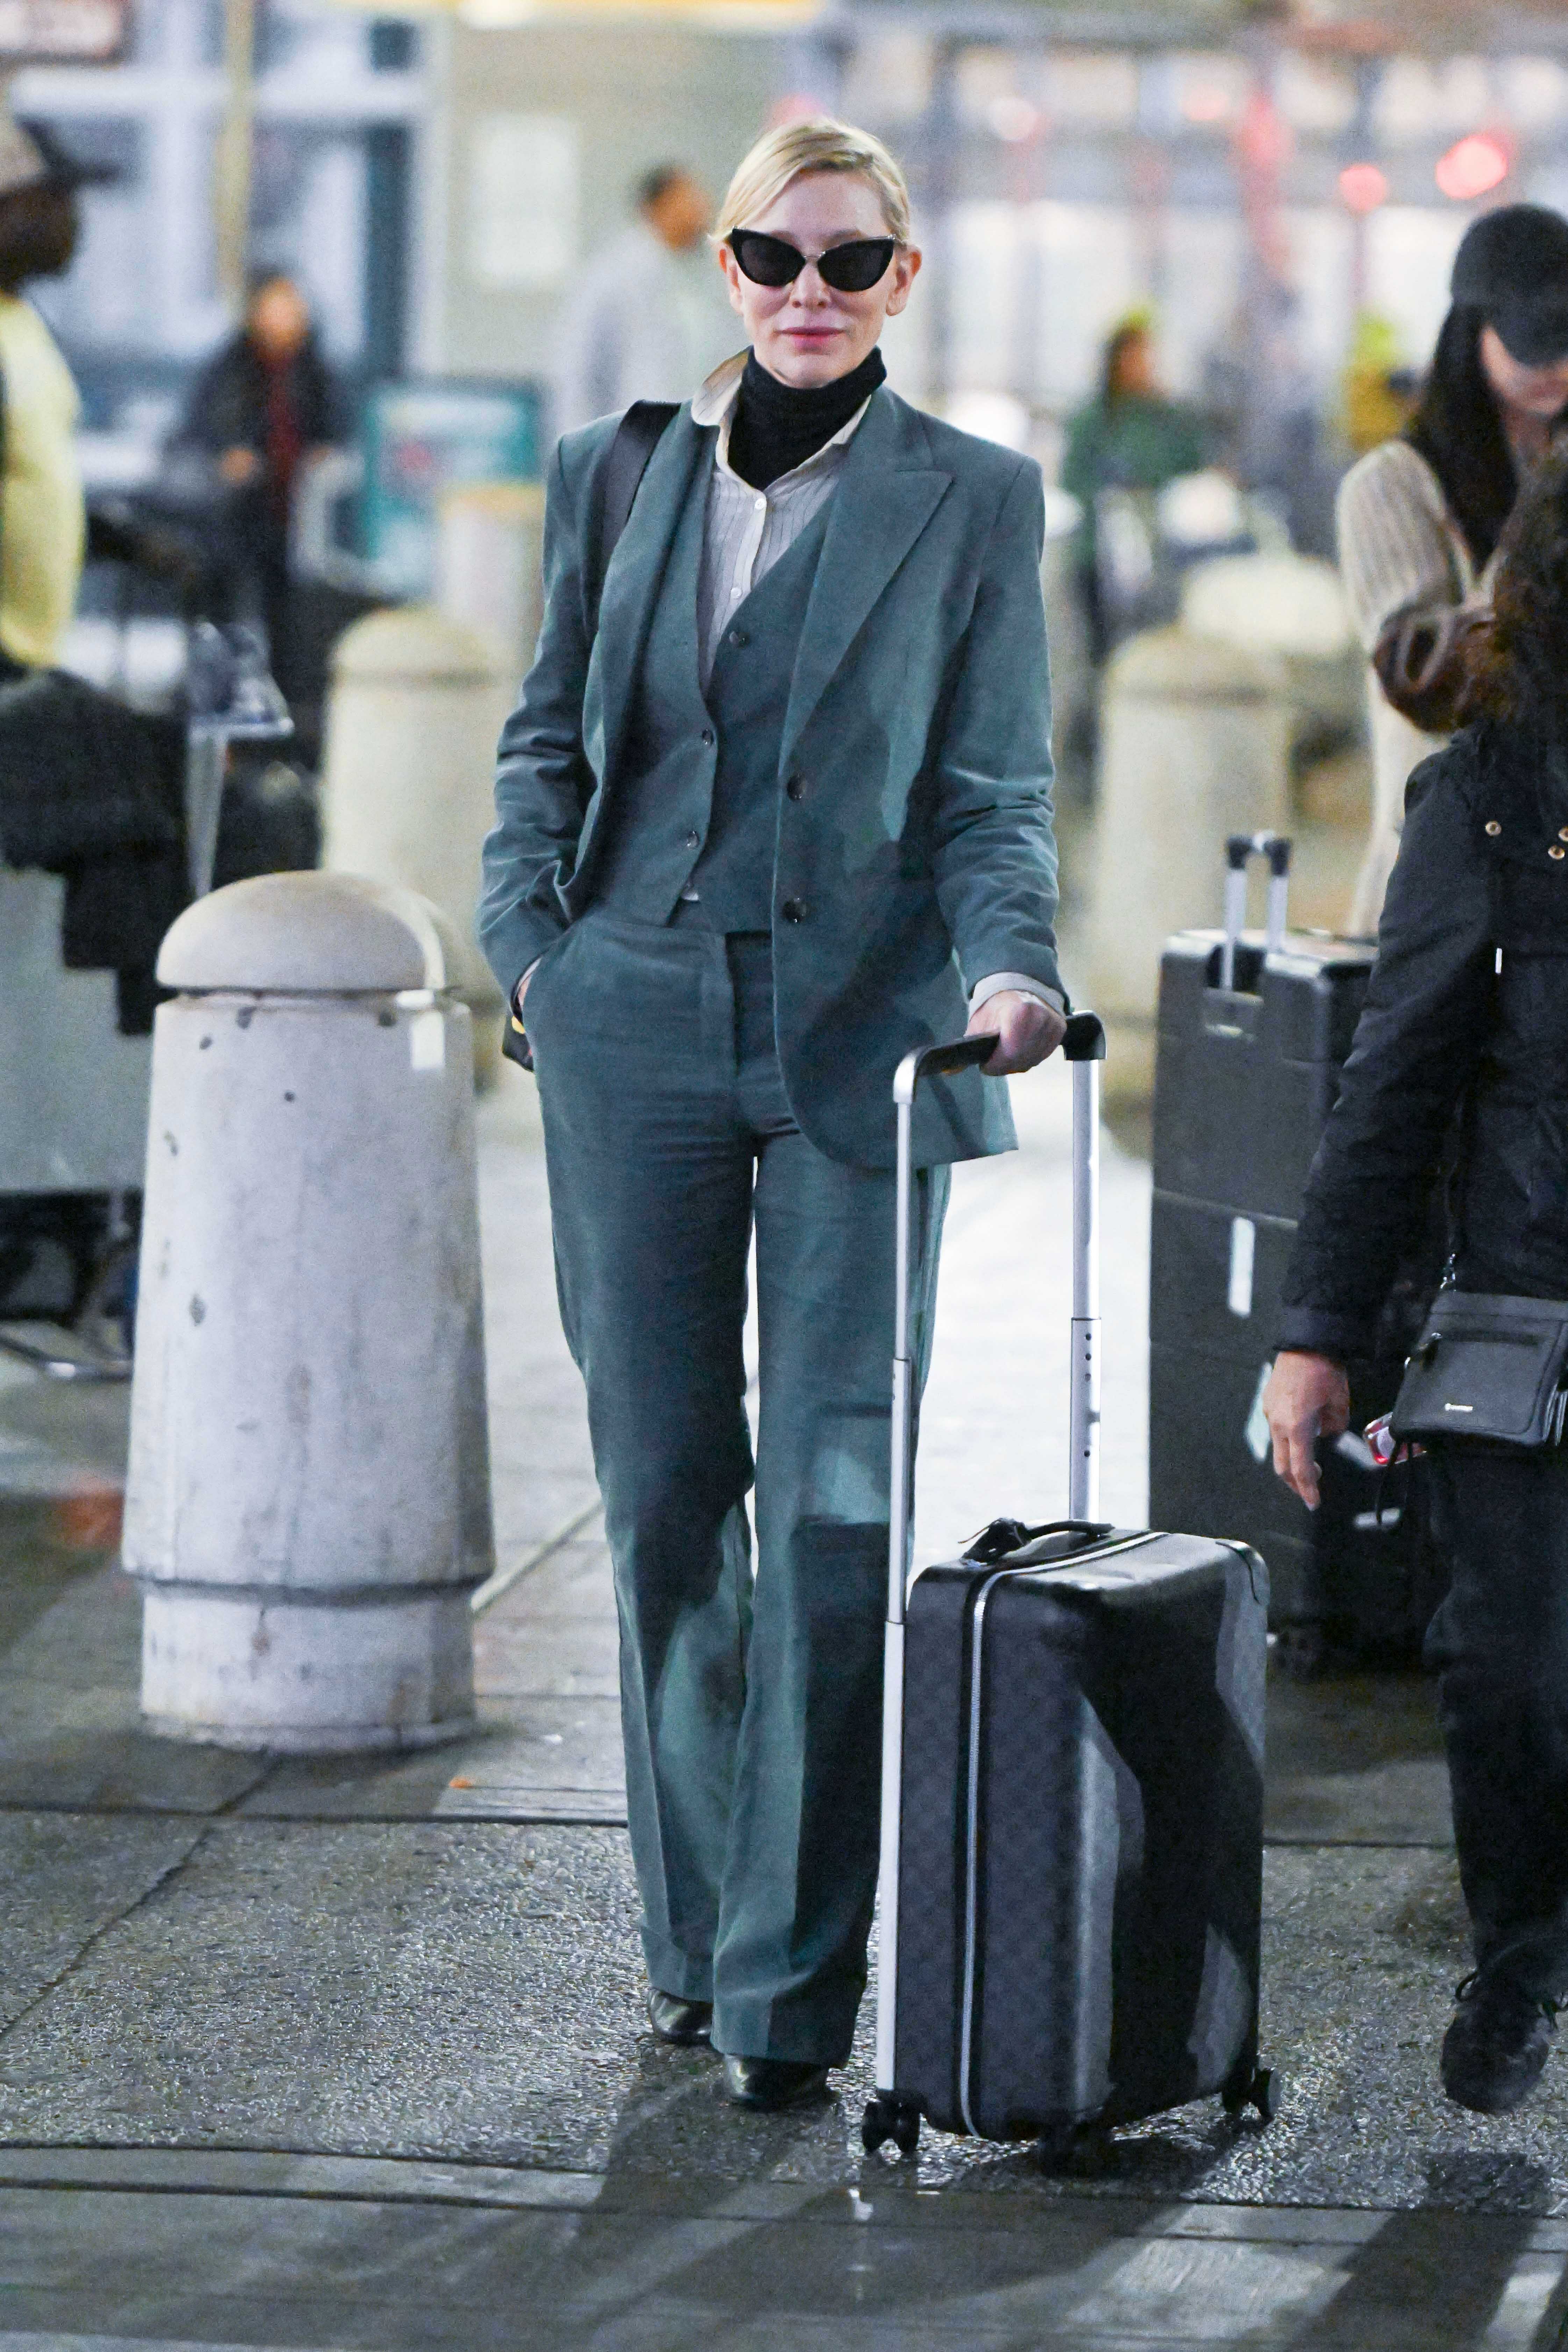 Cate Blanchett wearing Mango suit to the airport.